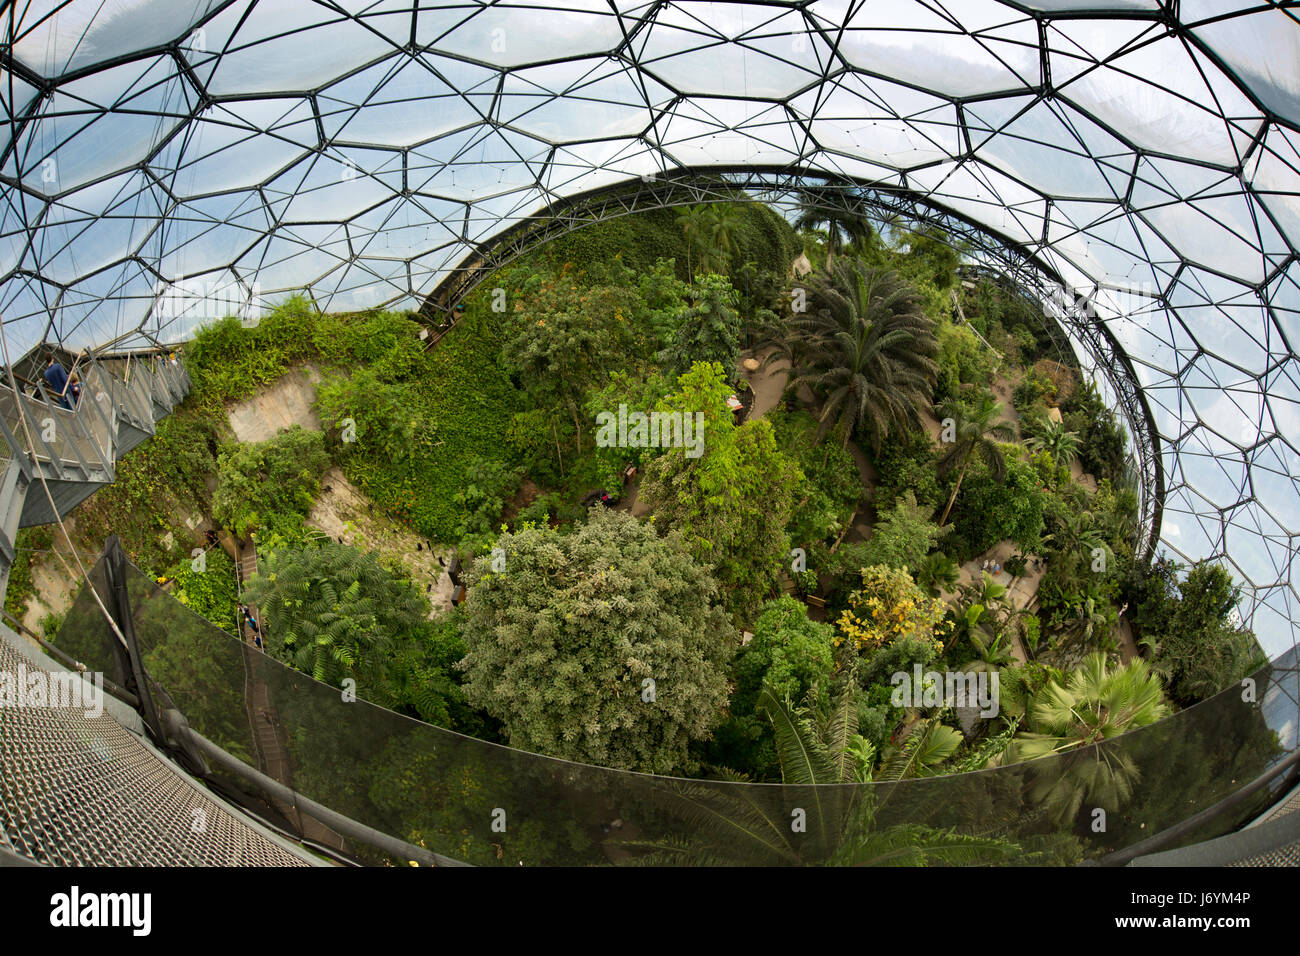 UK, Cornwall, St Austell, Bodelva, Eden Project, Rainforest Biome, wide angle view down from elevated platform Stock Photo